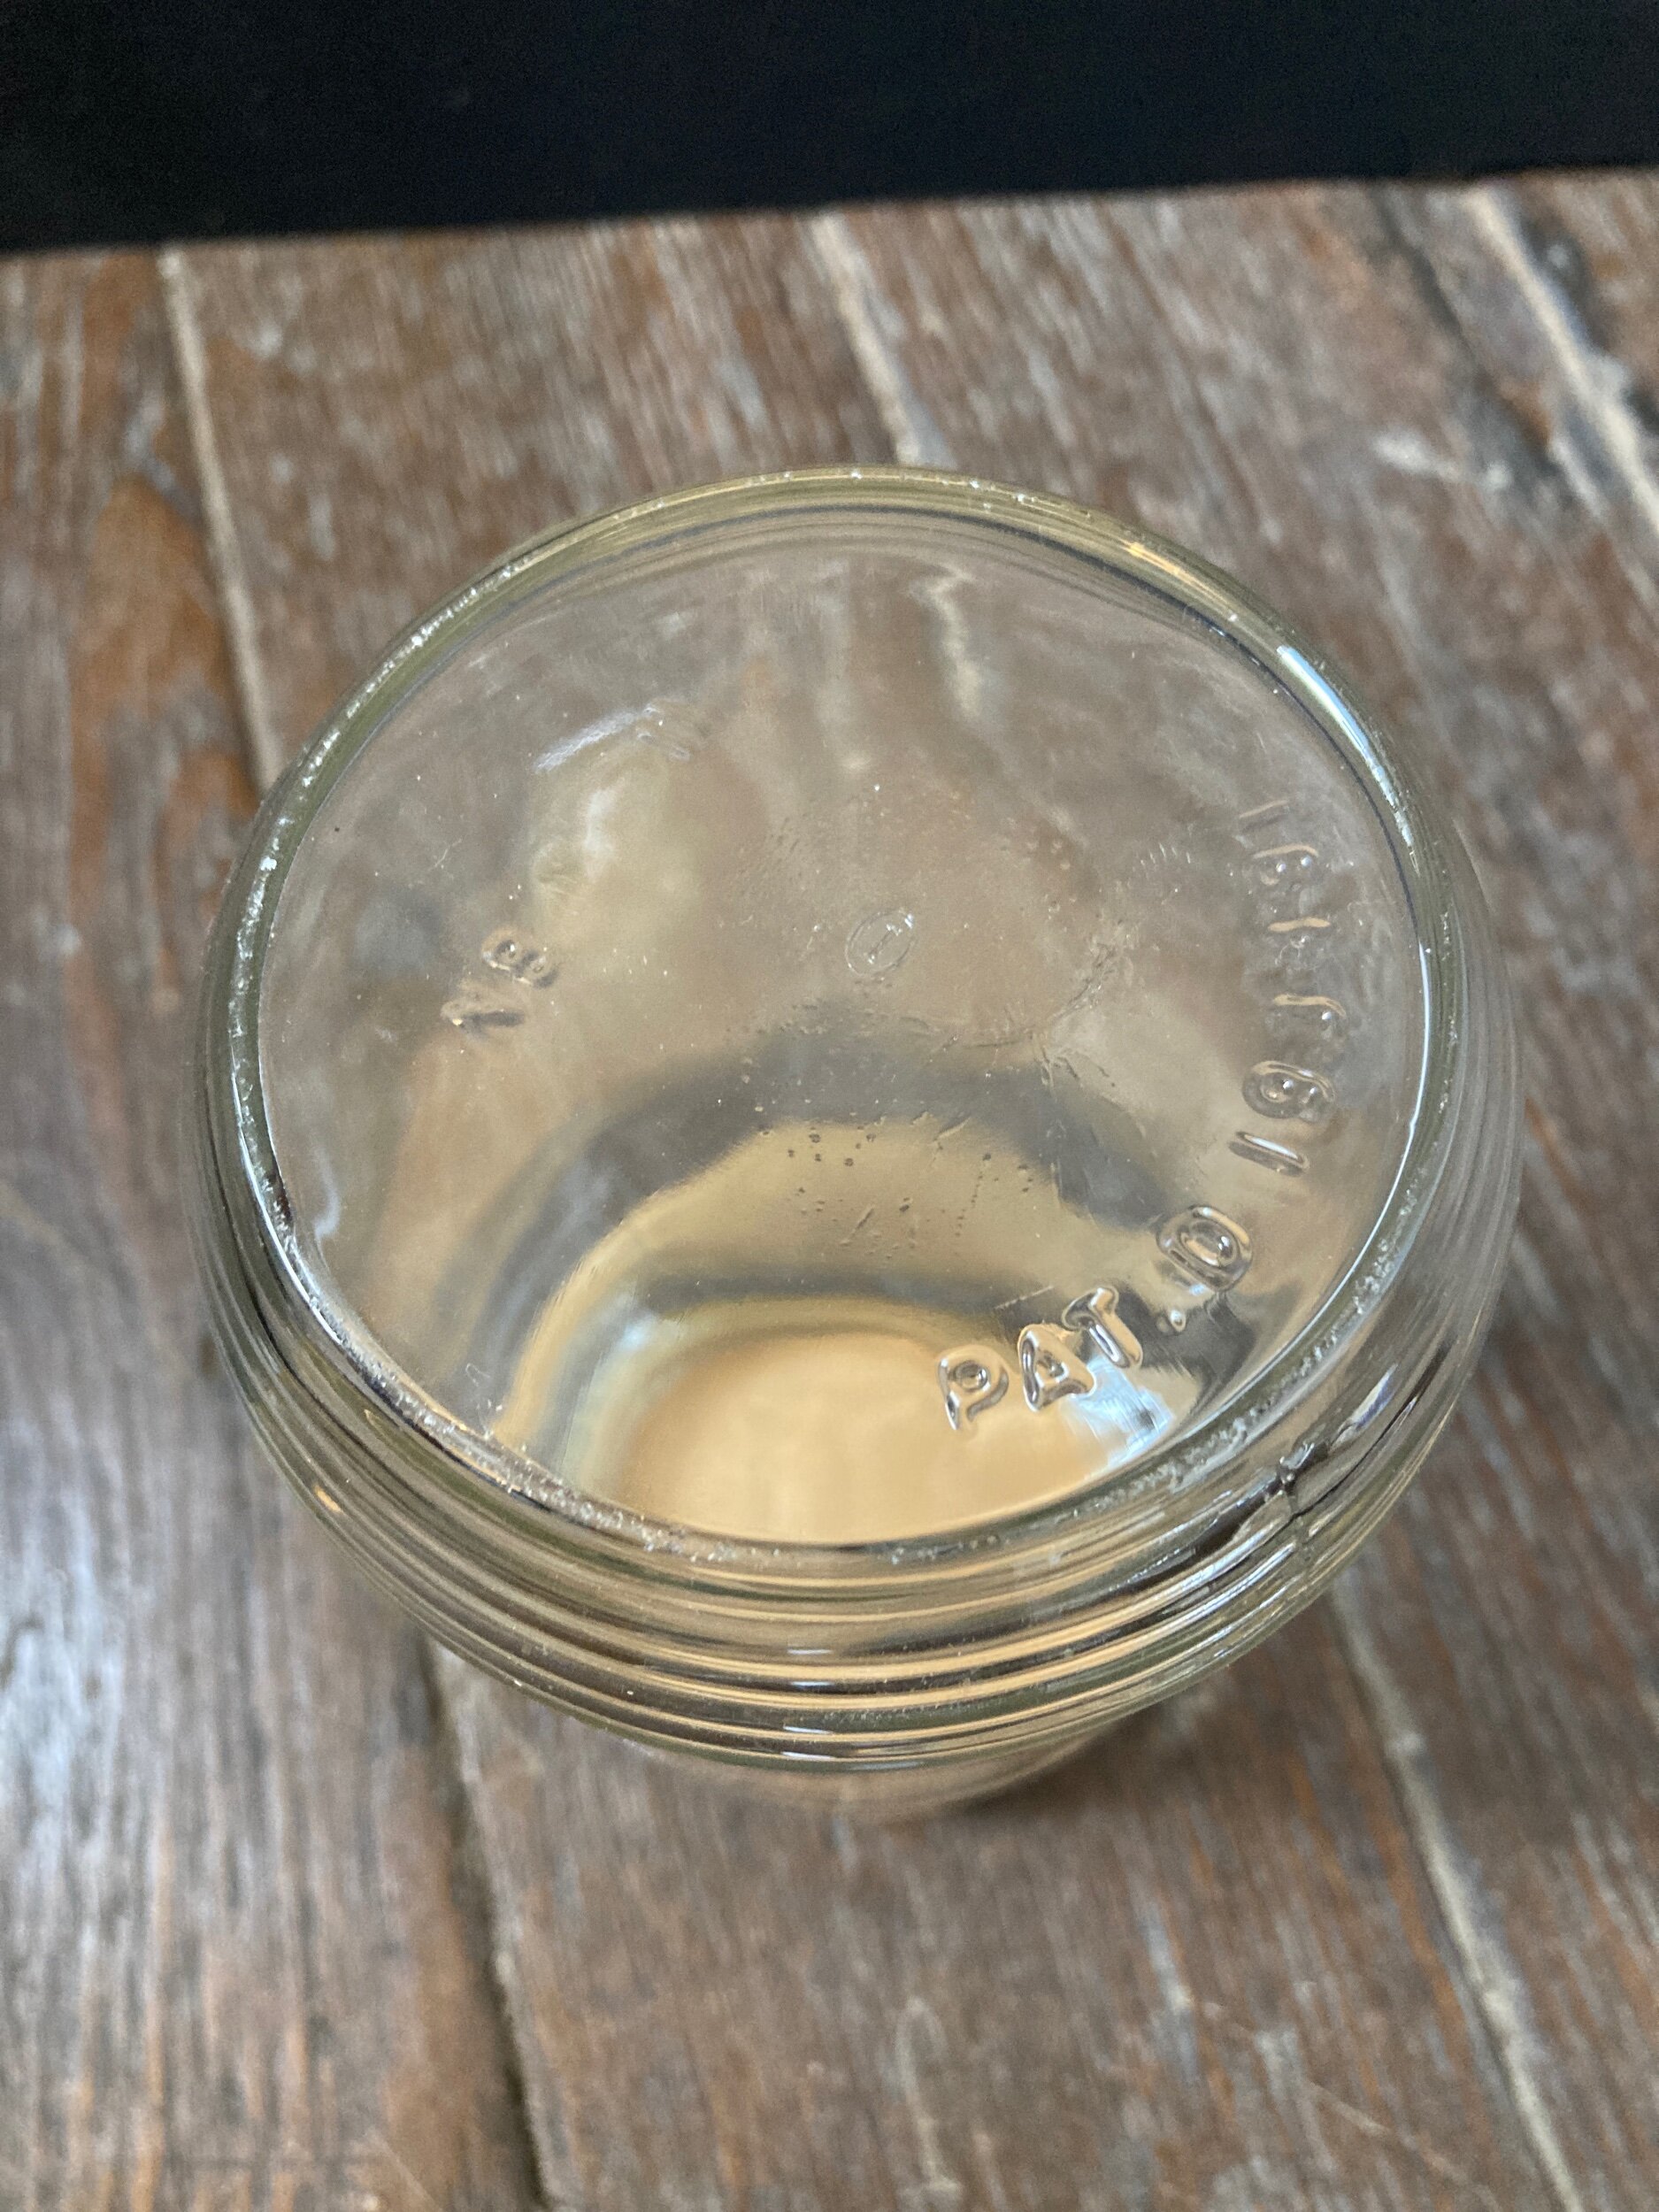 Maxwell House Instant Coffee Glass Jar — Poor Johnny's